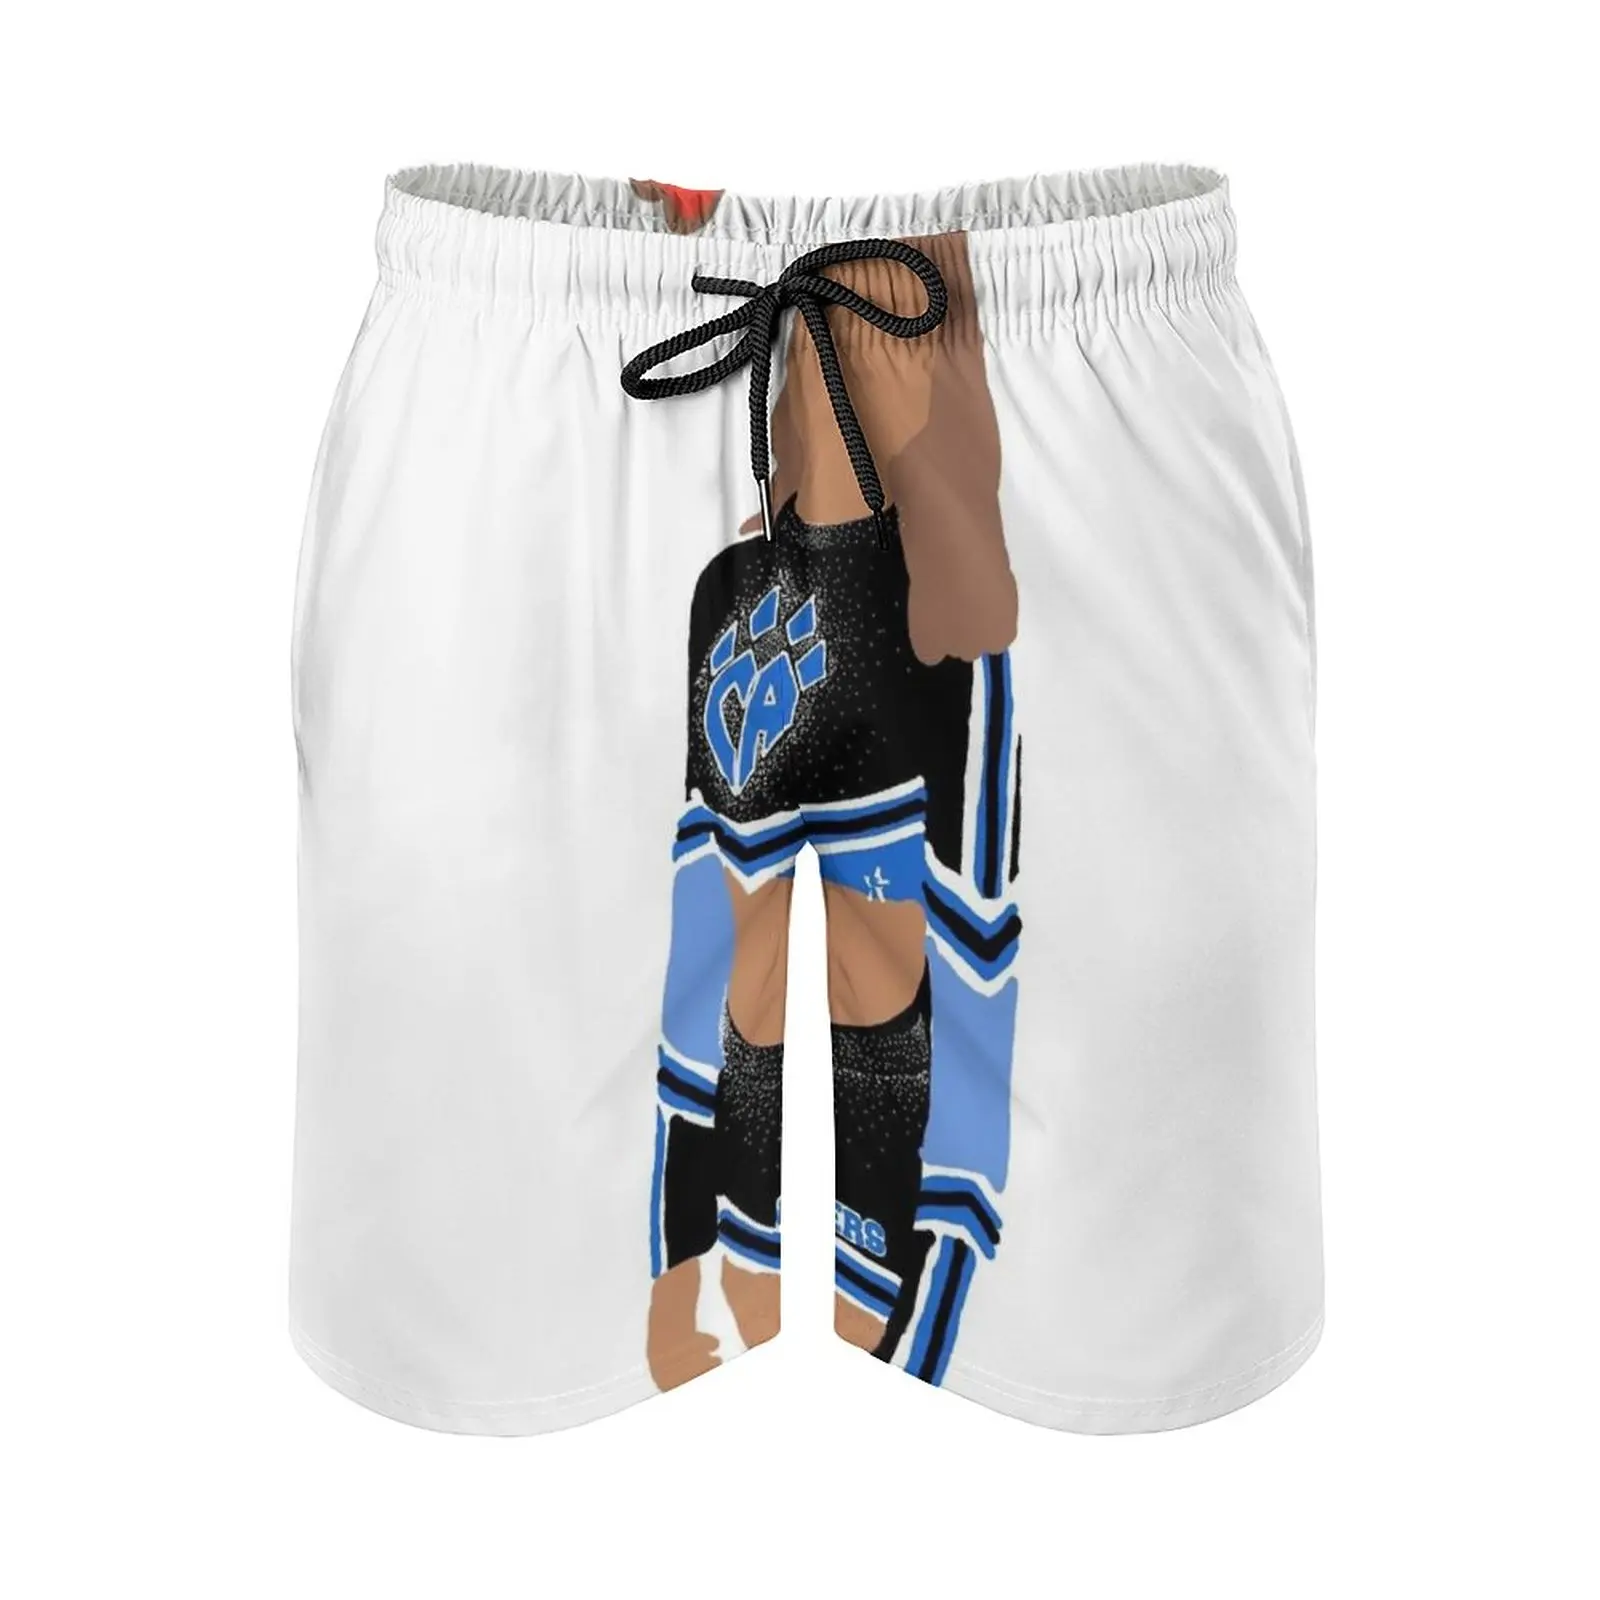 Panthers New Mens Swim Shorts Quick Dry Beach Board Swimwear Fashion Volley Shorts Panthers Cheer Athletics Cheer Cheer Babs